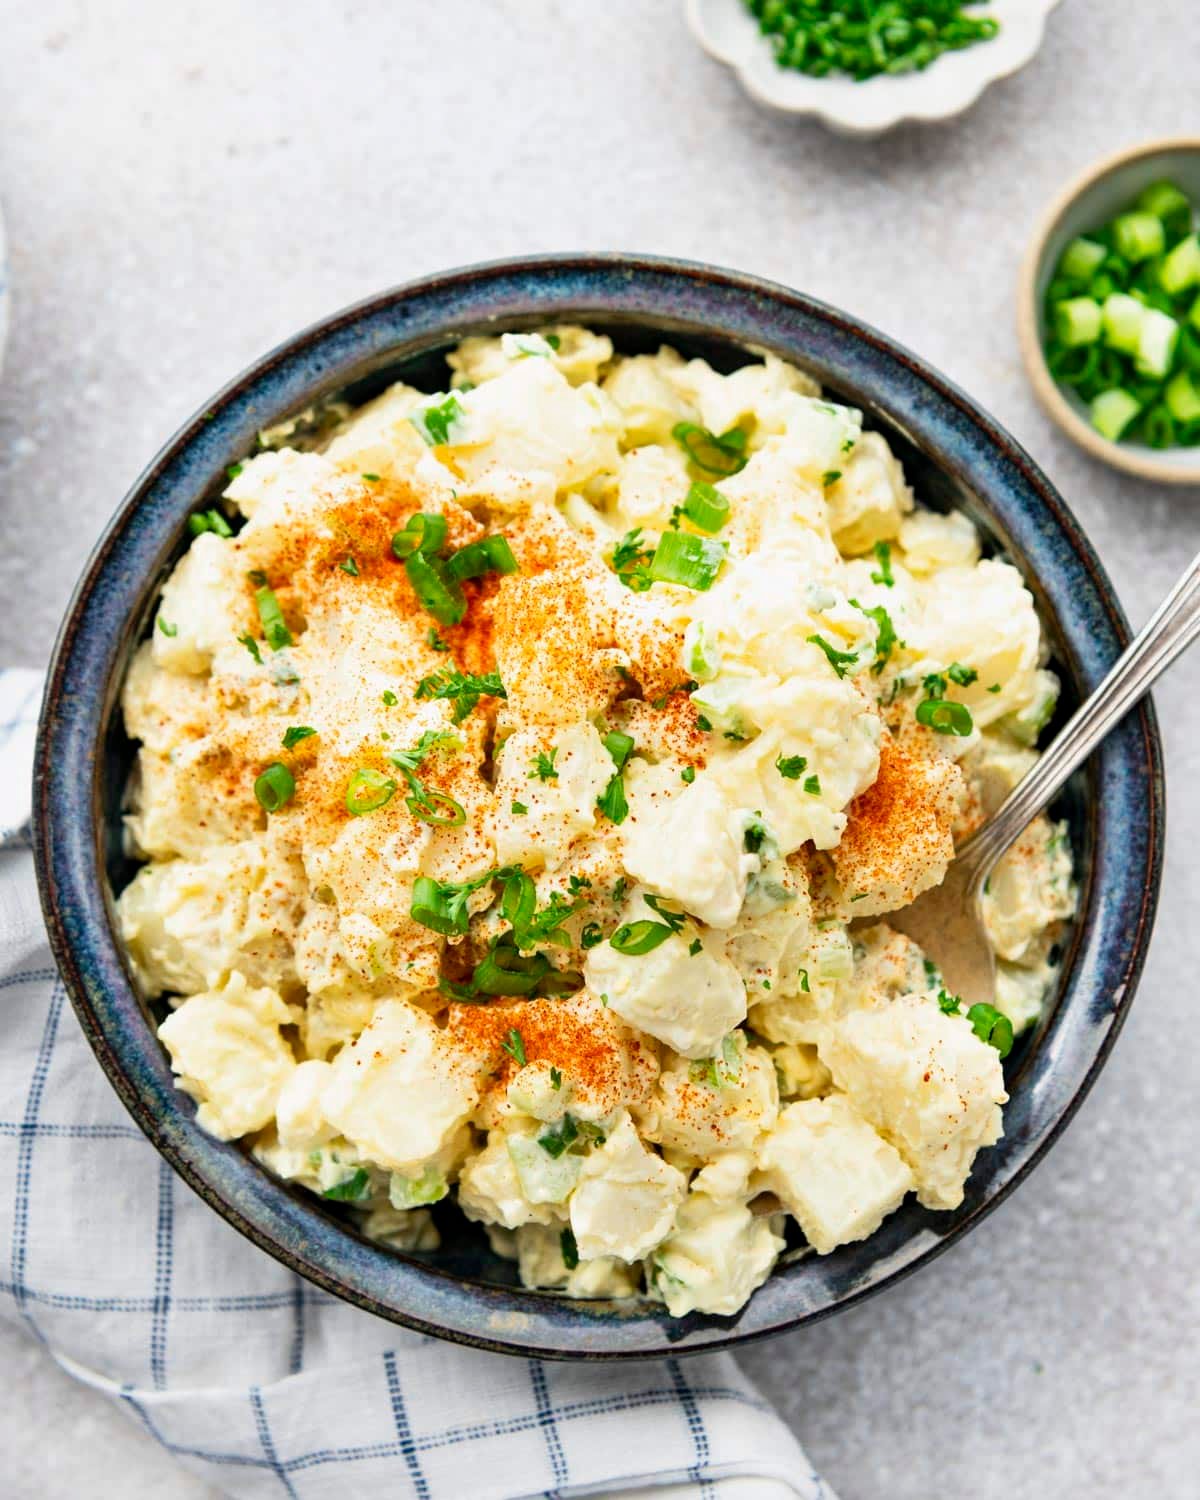 Overhead image of southern potato salad recipe with sliced green onions and paprika on top.